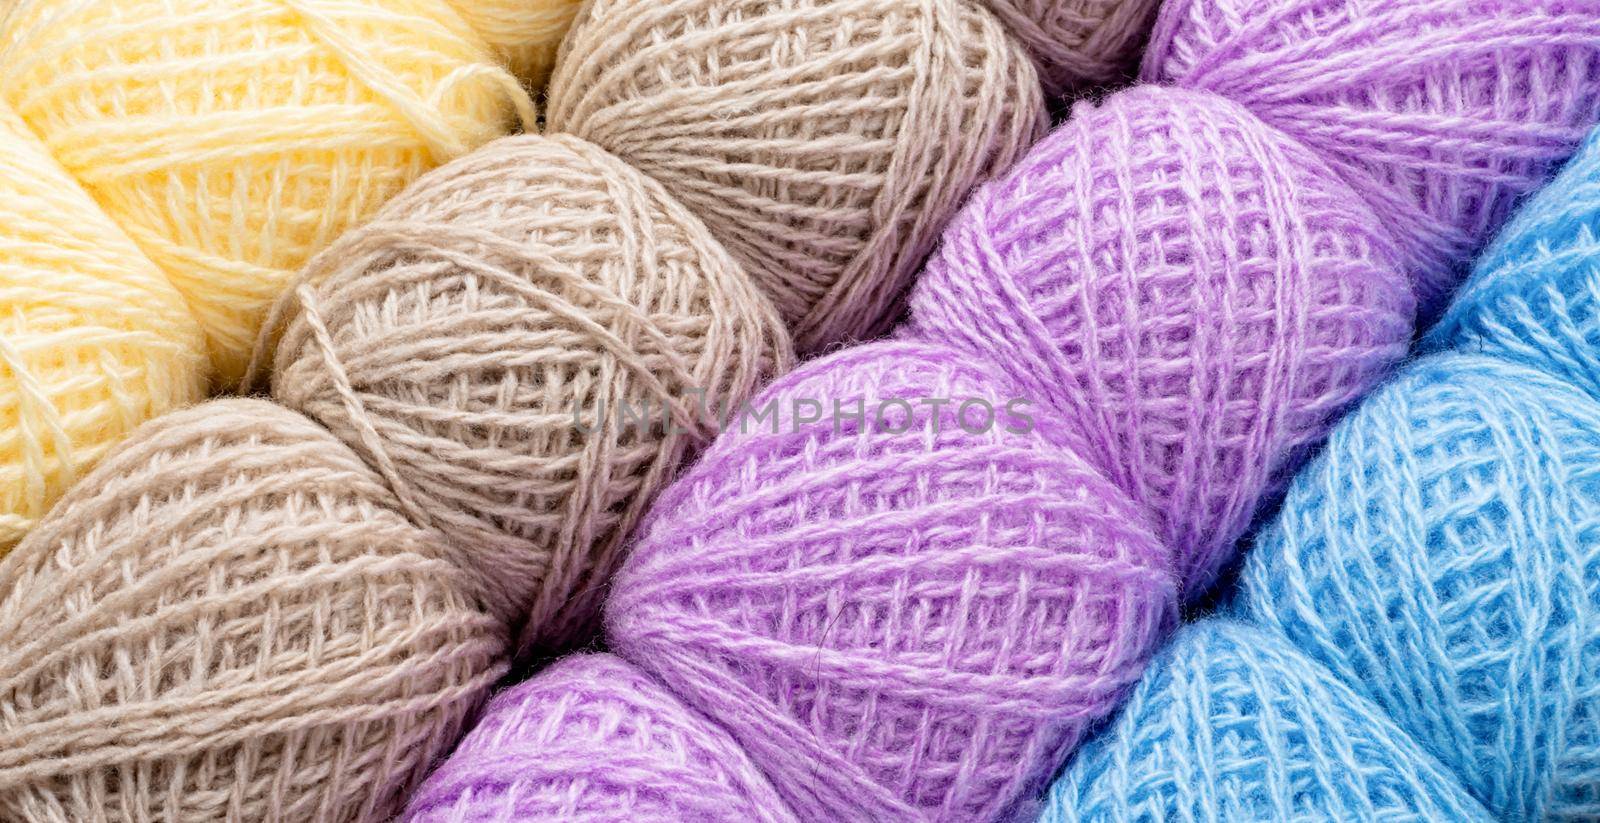 Knitting needles, colorful threads. Selection of pastel colored yarn wool on shopfront. Knitting background, a lot of balls. Knitting yarn for handmade winter clothes